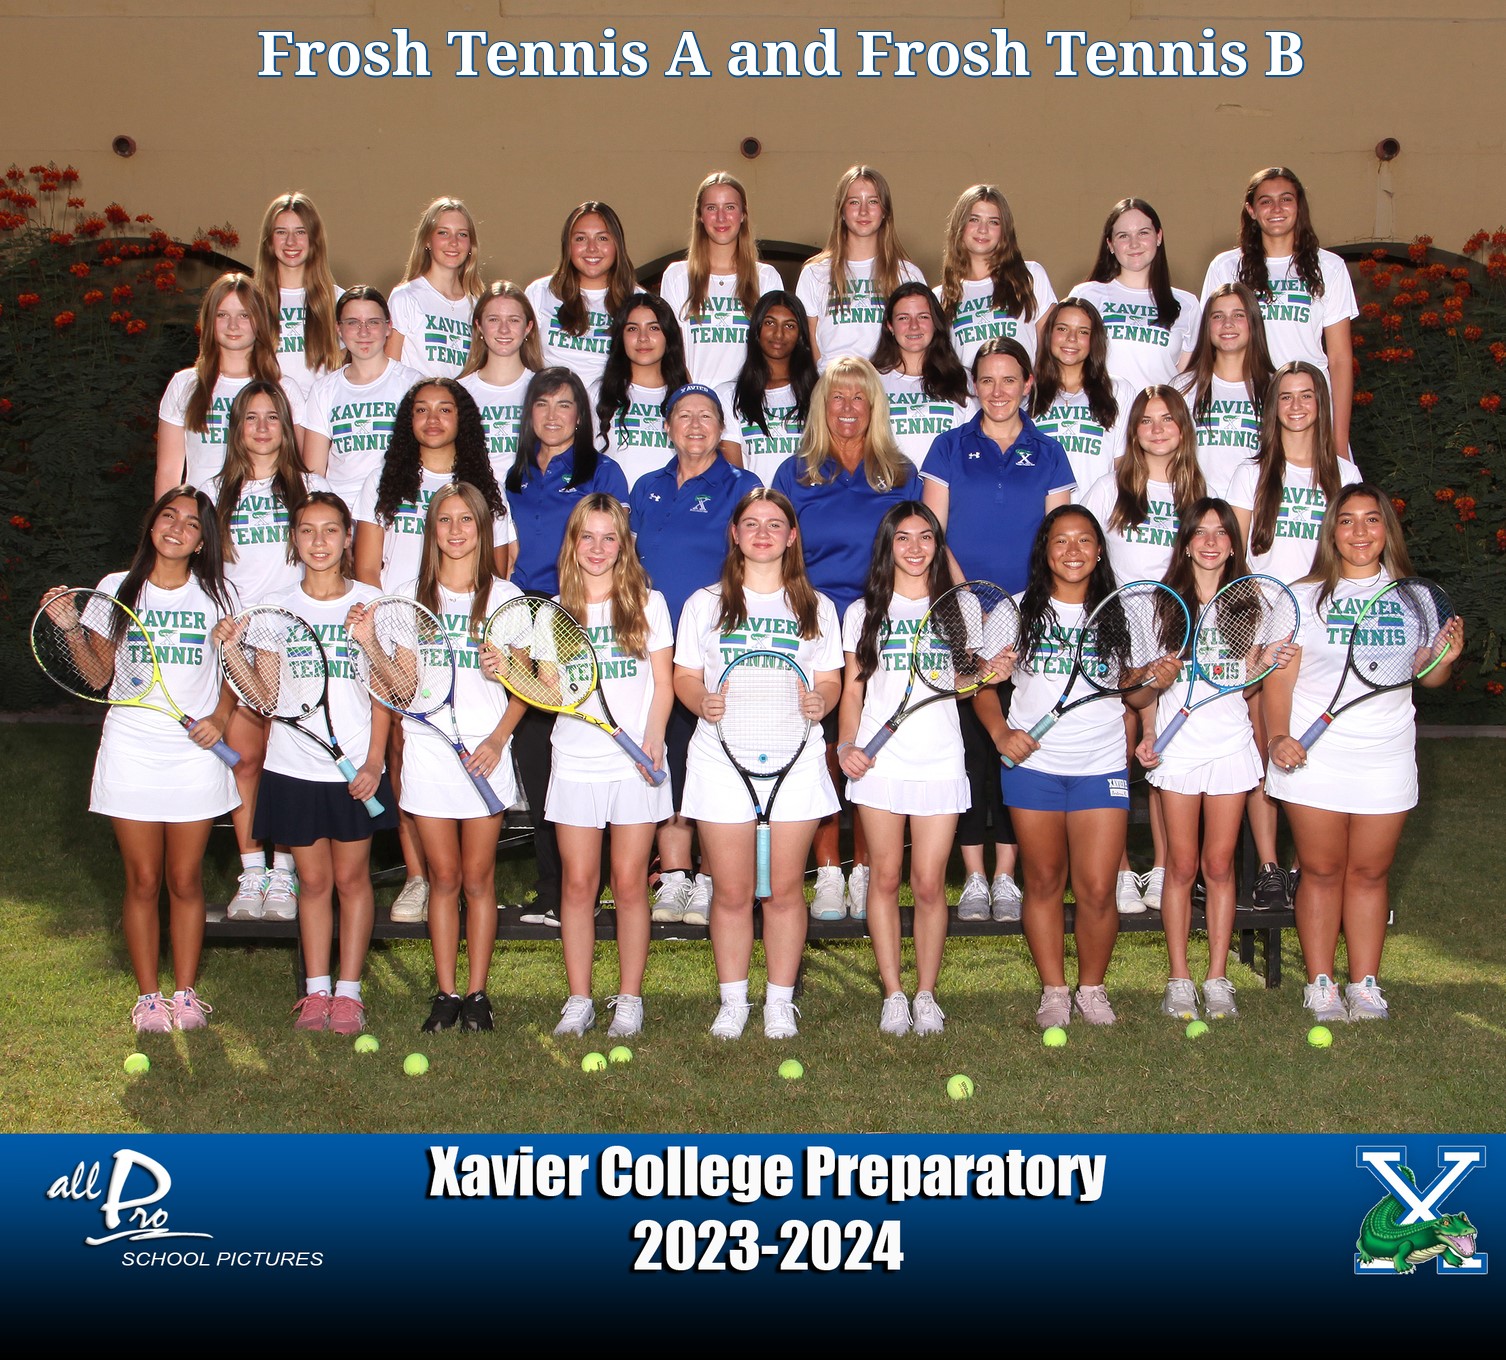 Comp Frosh Tennis Team added caption and cropped